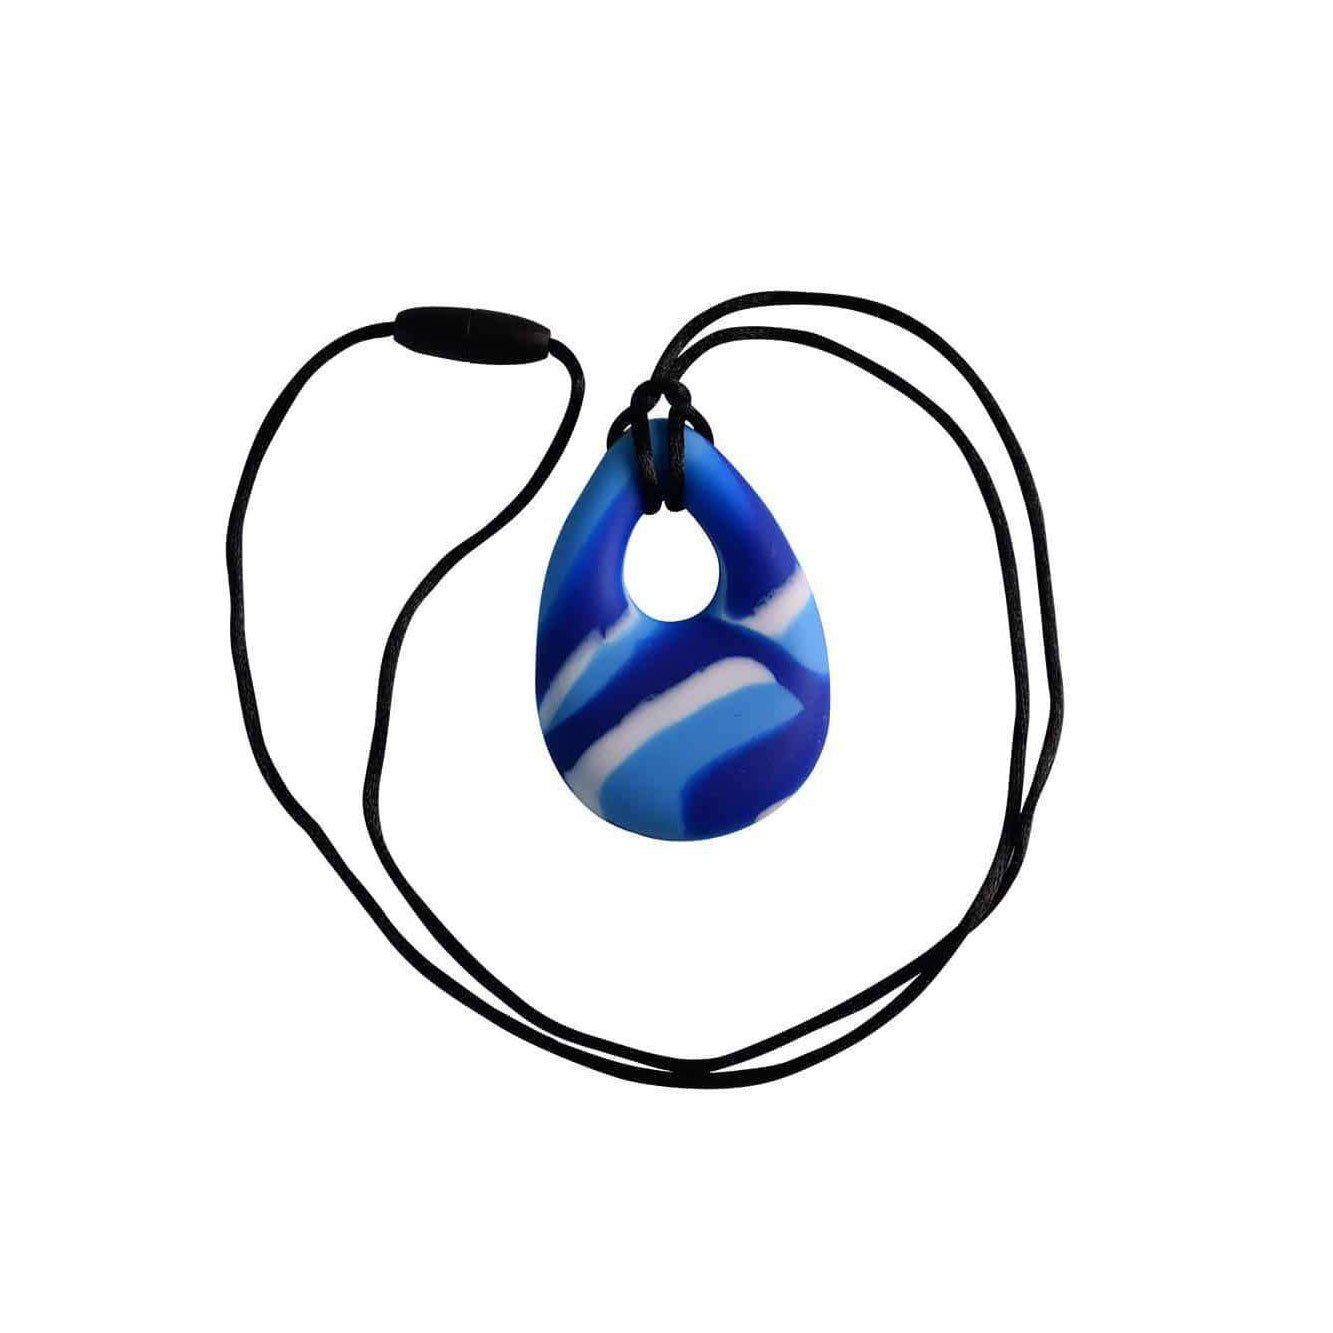 Buds oval Chew Pendant With Breakaway Clasp Necklace- Blue Swirl Color